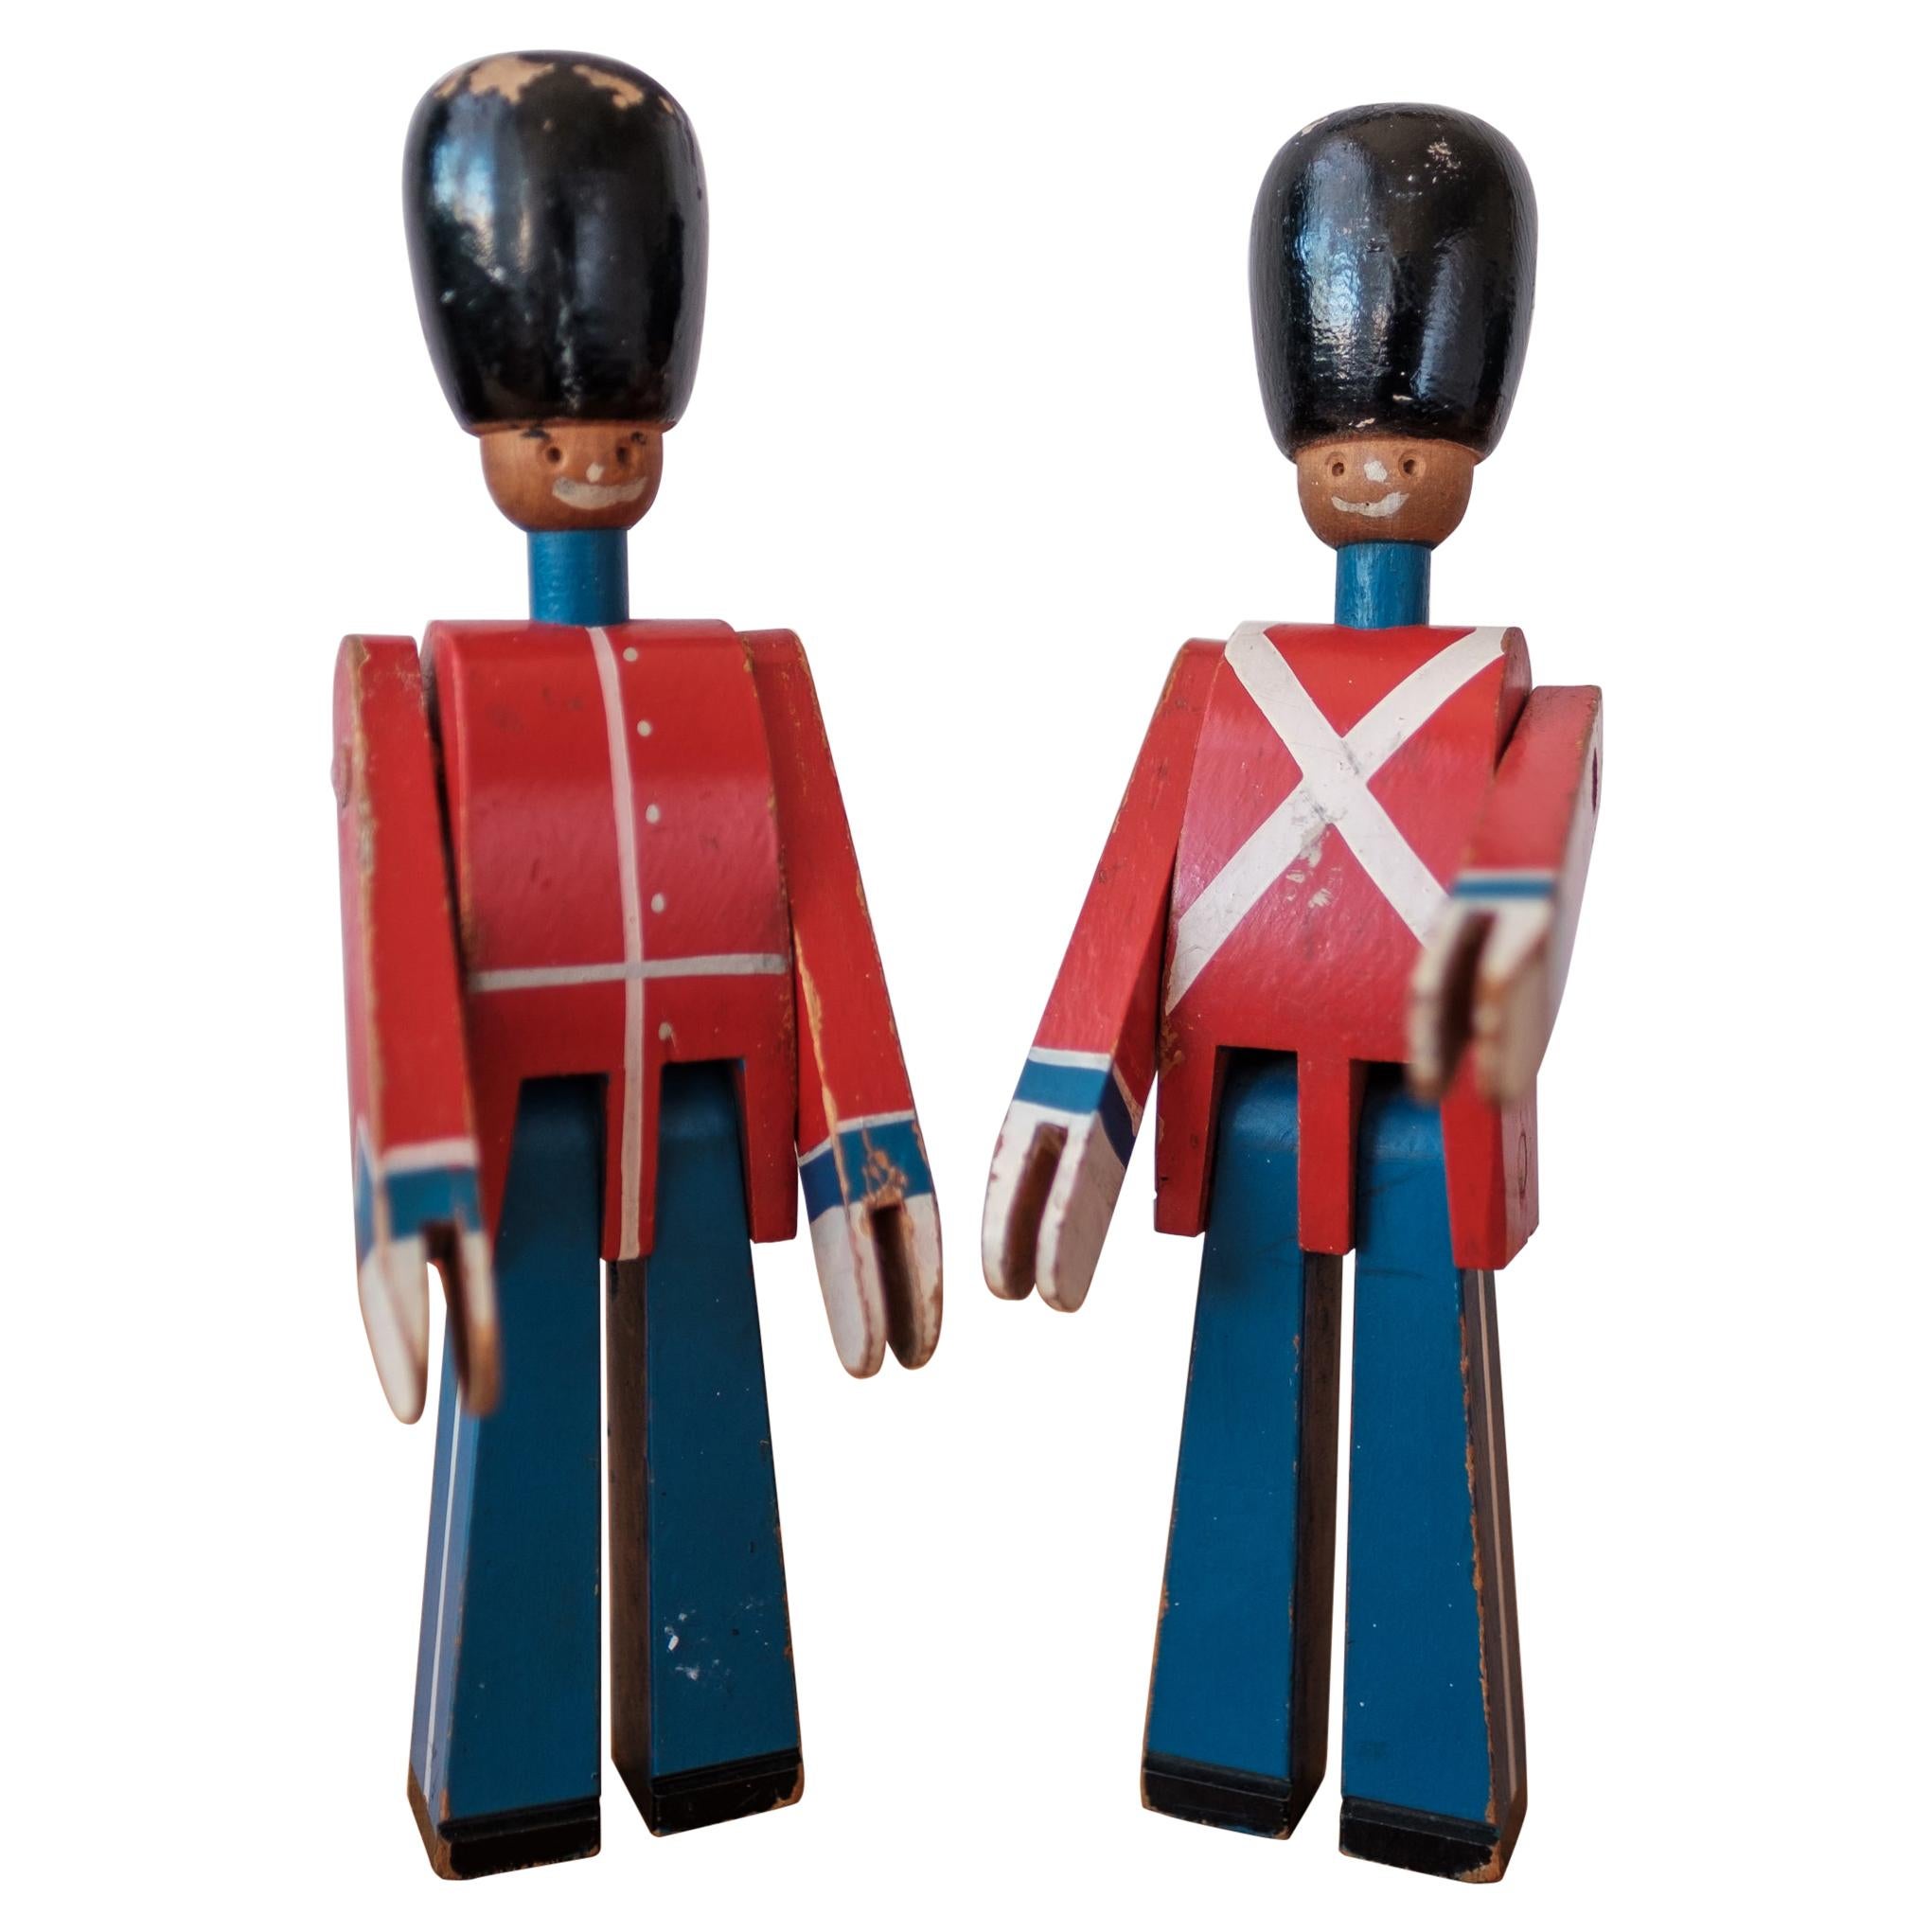 Wooden Toy Soldiers by Kay Bojesen